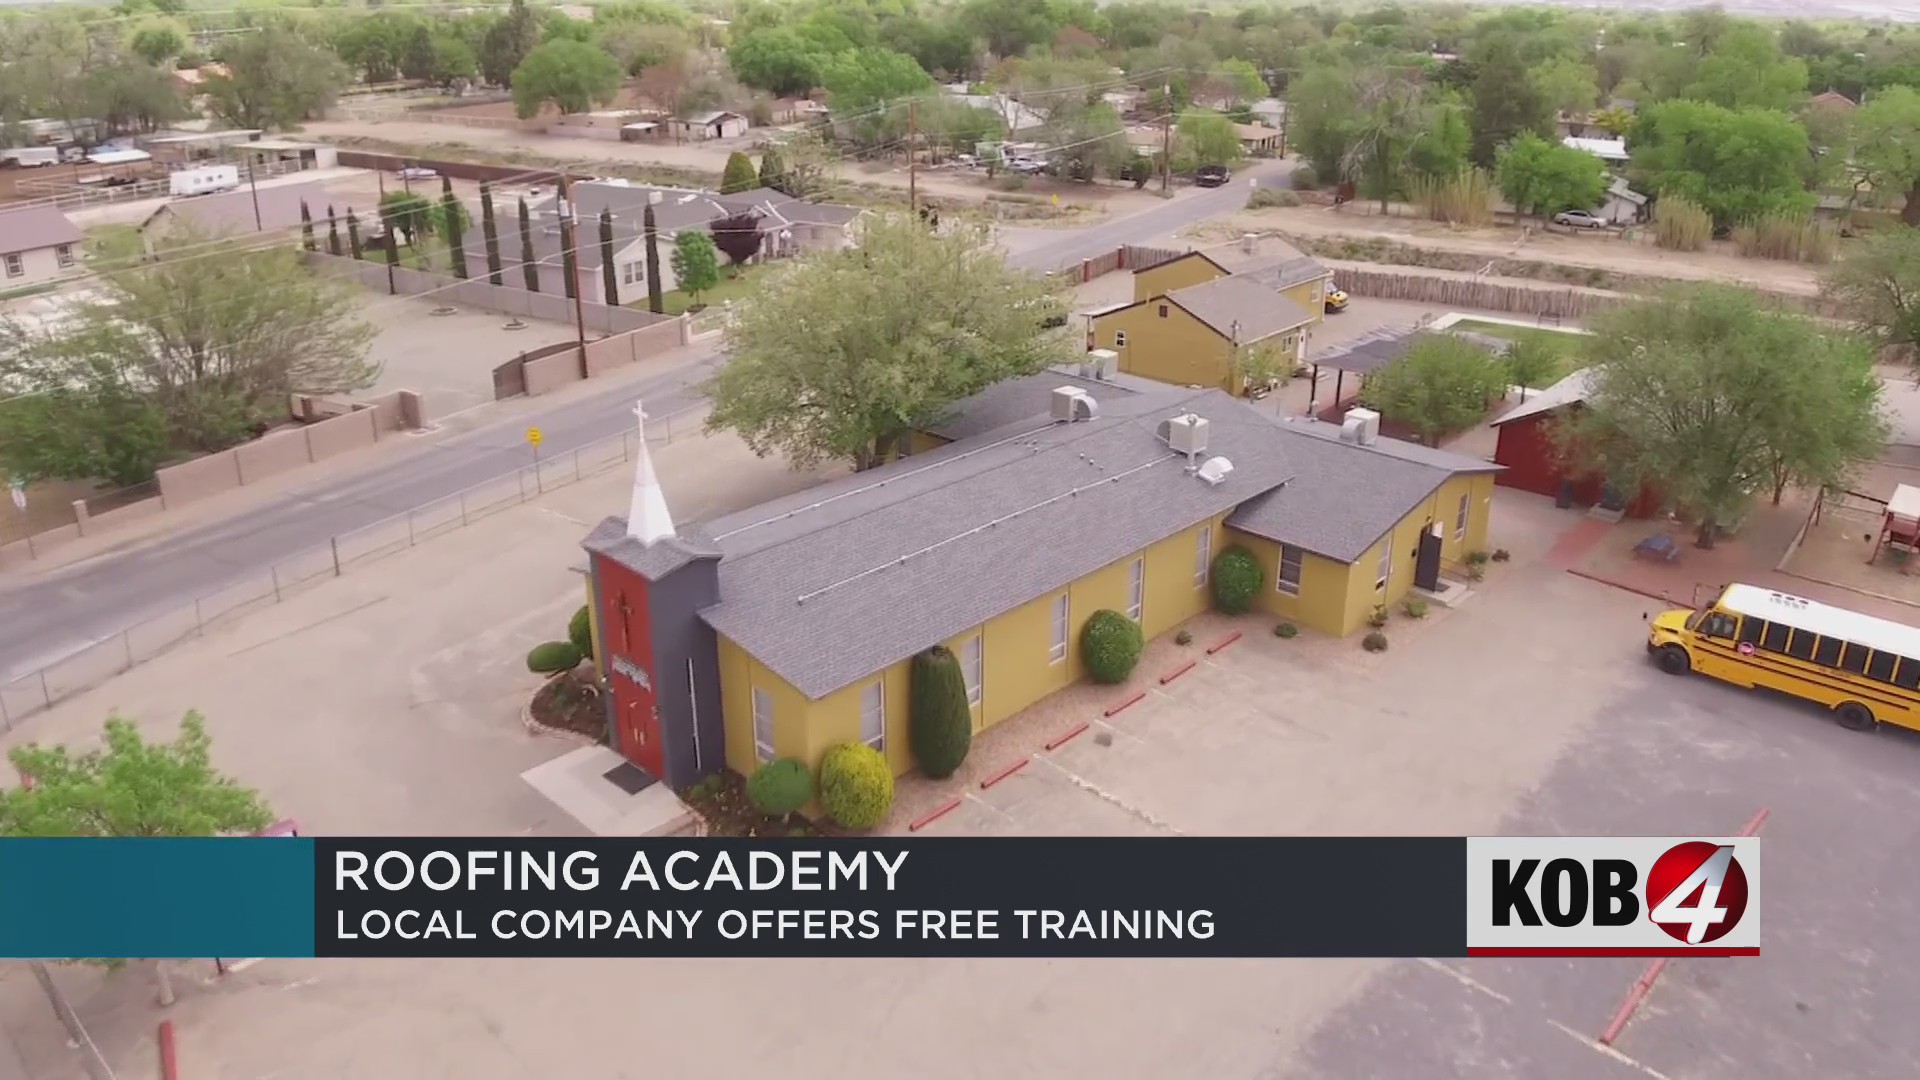 Local roofing company offers free academy